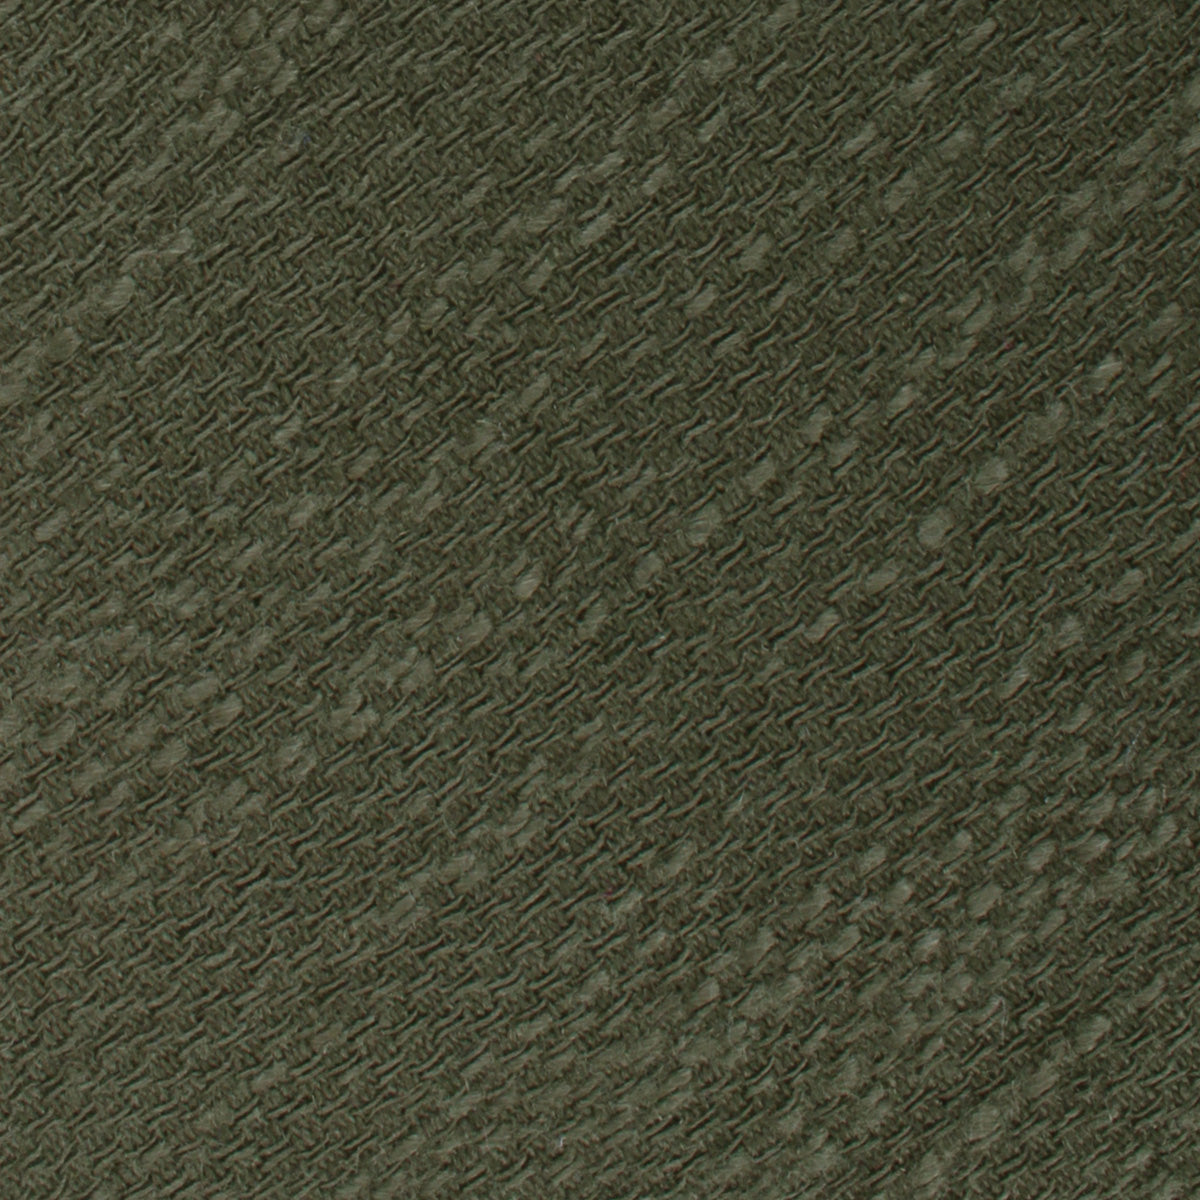 Olive Green Coarse Linen Kids Bow Tie Fabric